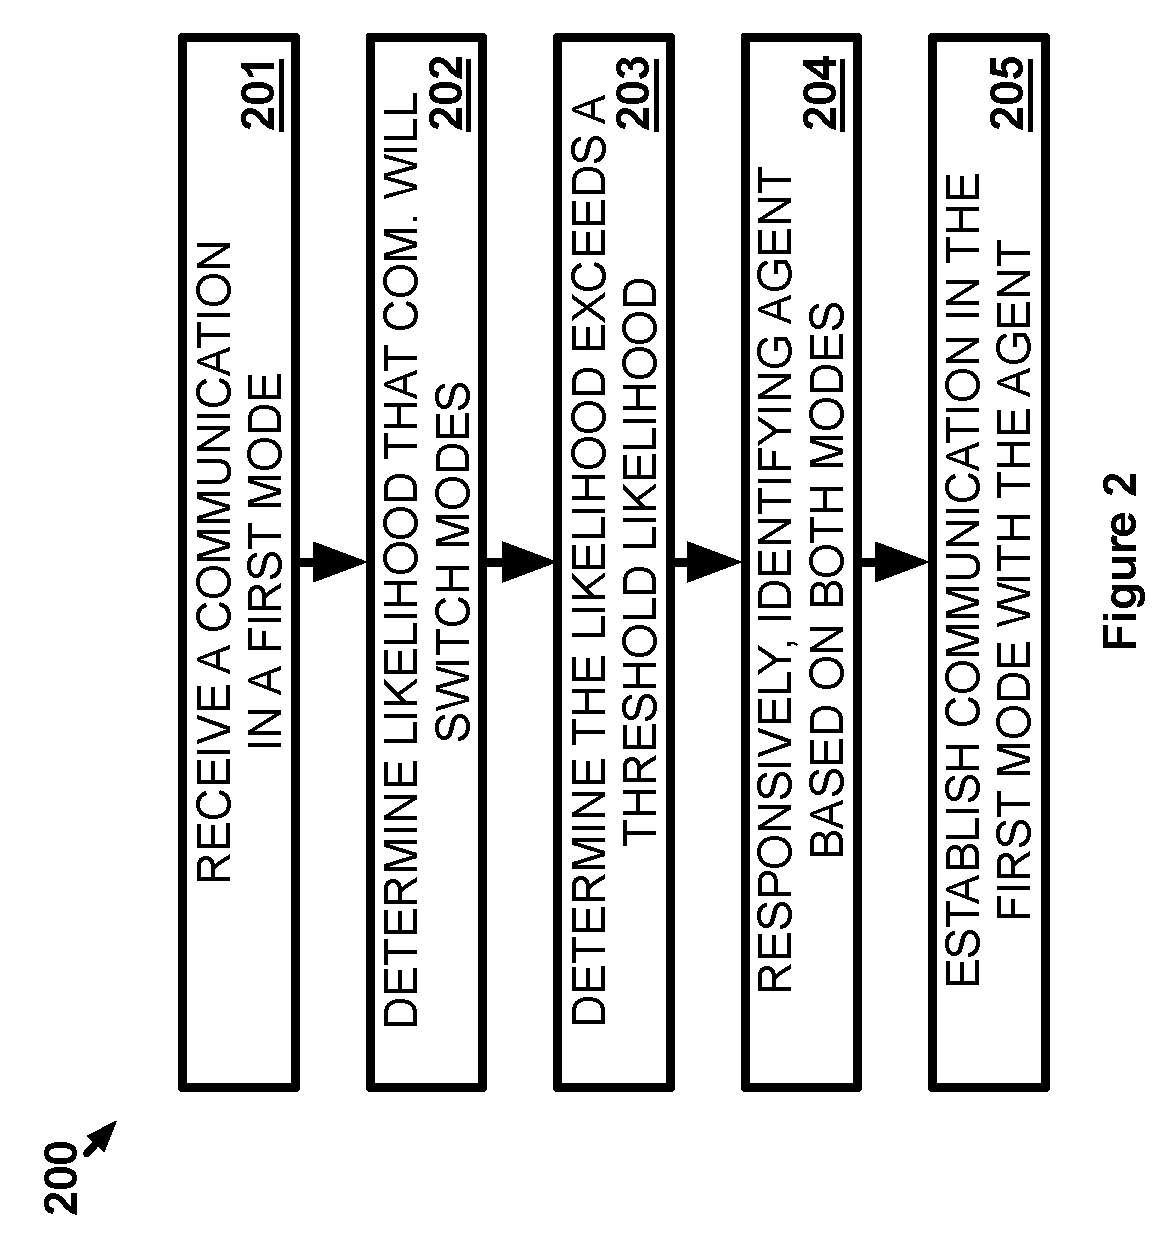 Agent selection in a contact center based on likelihood of a communication changing modes